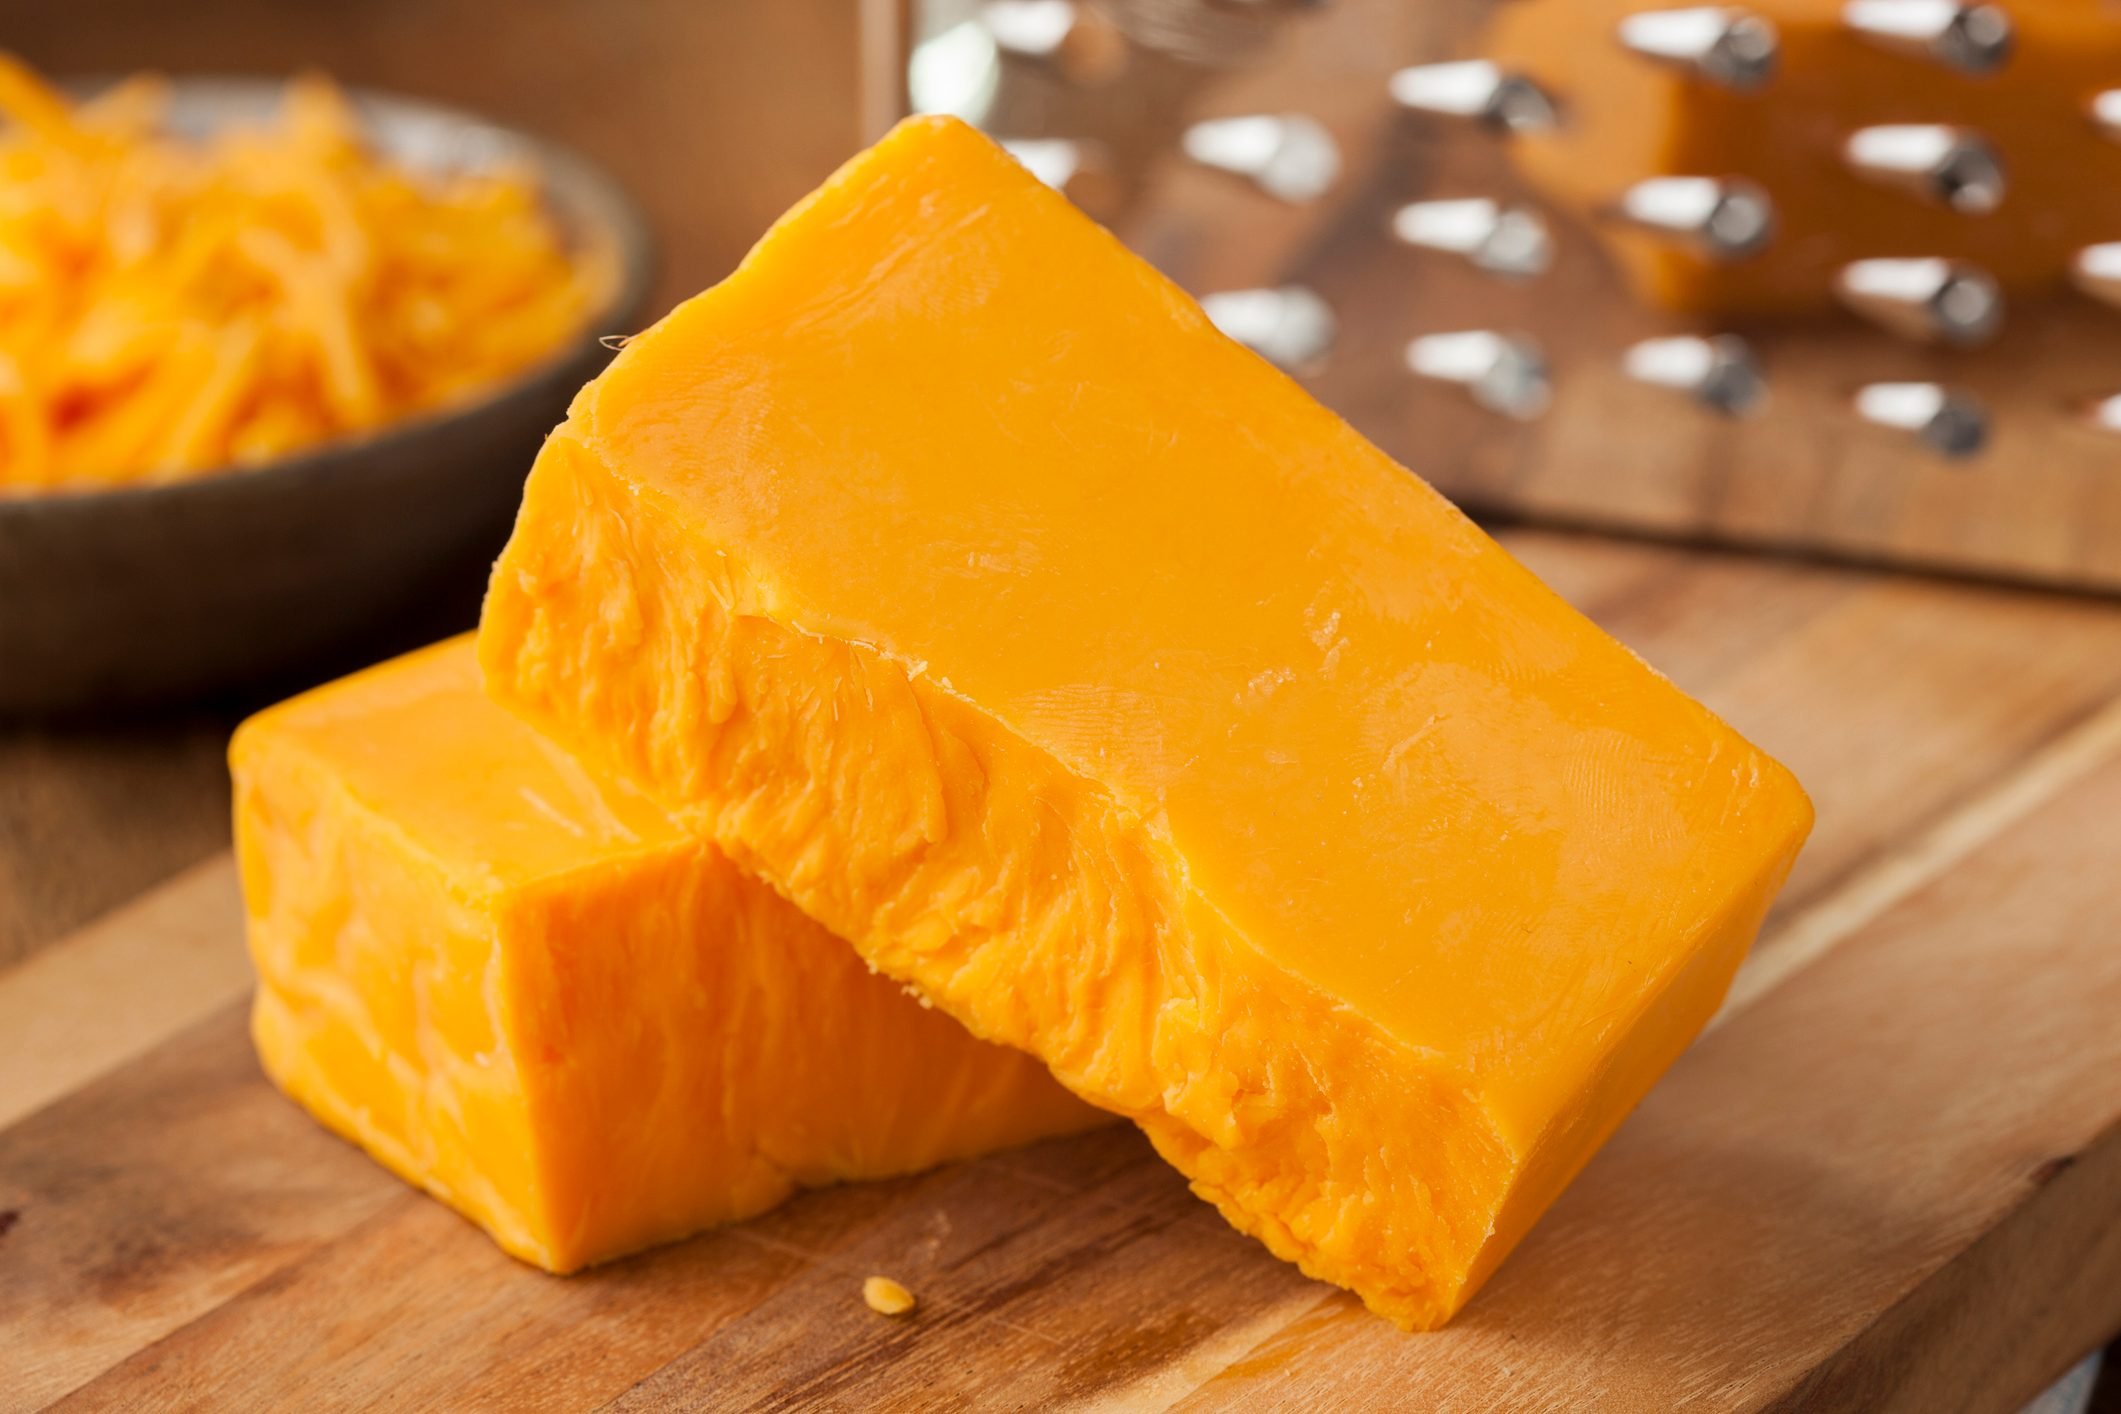 Why Is Cheddar Cheese Orange? | Taste of Home